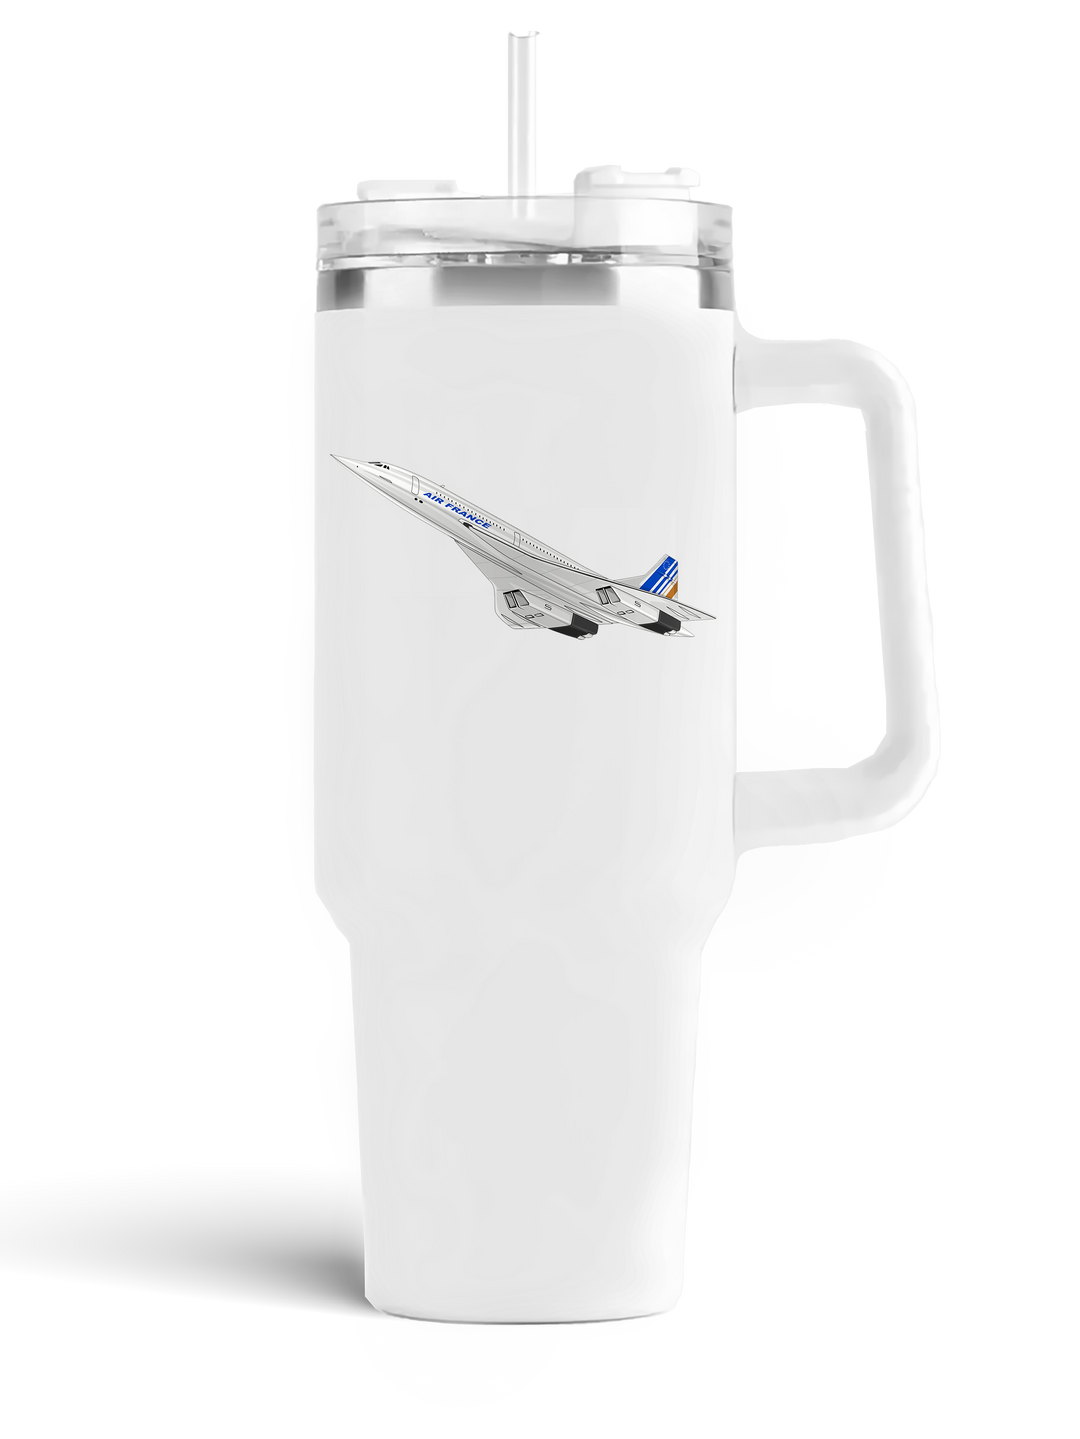 Air France Concorde quencher